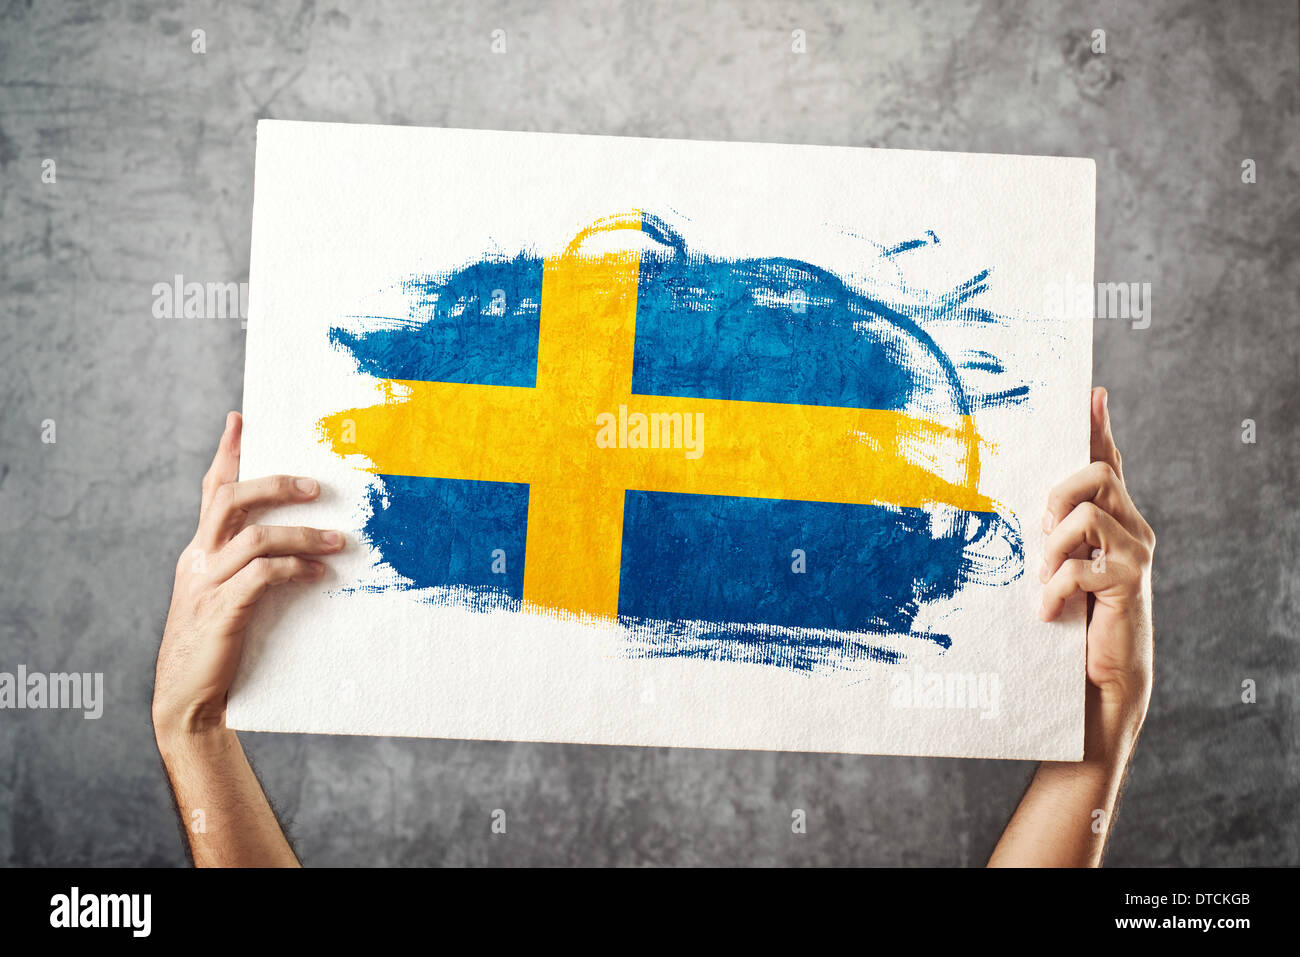 Sweden flag. Man holding banner with Swedish Flag. Supporting national team, patriotism concept. Stock Photo